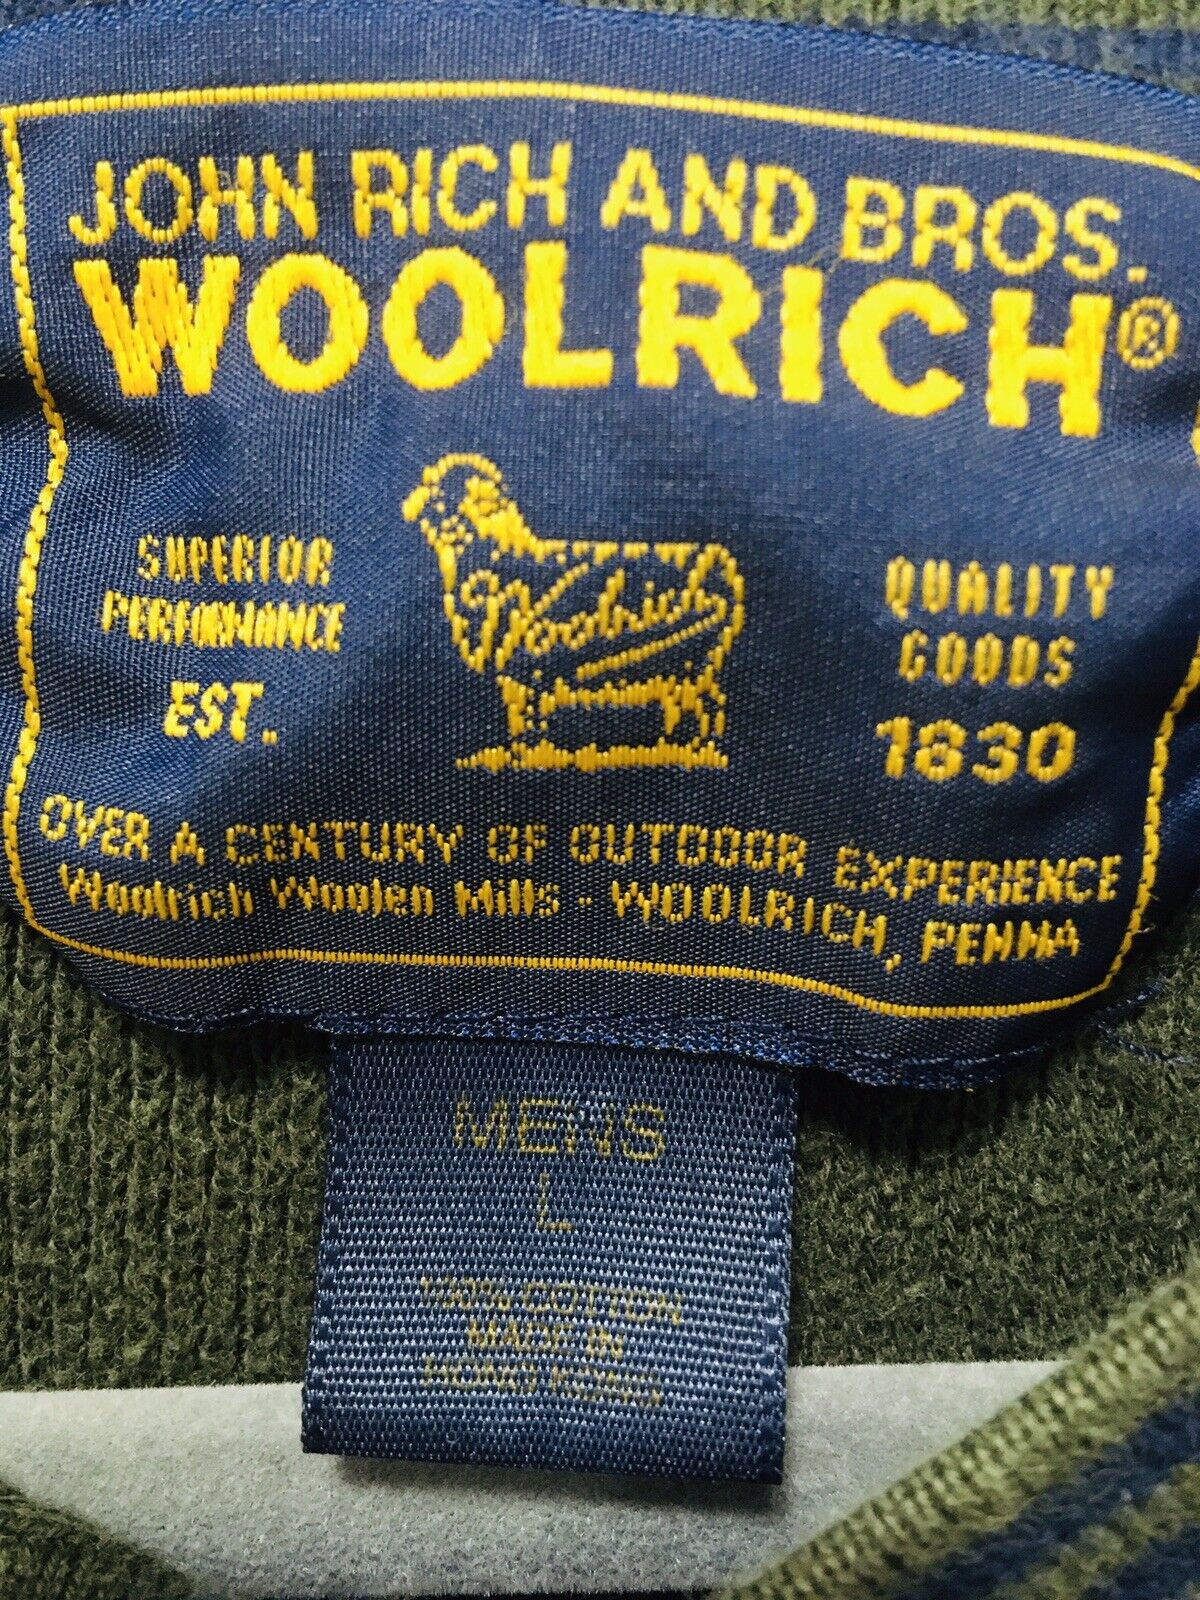 Vintage John Rich and Bros Woolrich 100%Cotton sweater mens Large green  V-neck